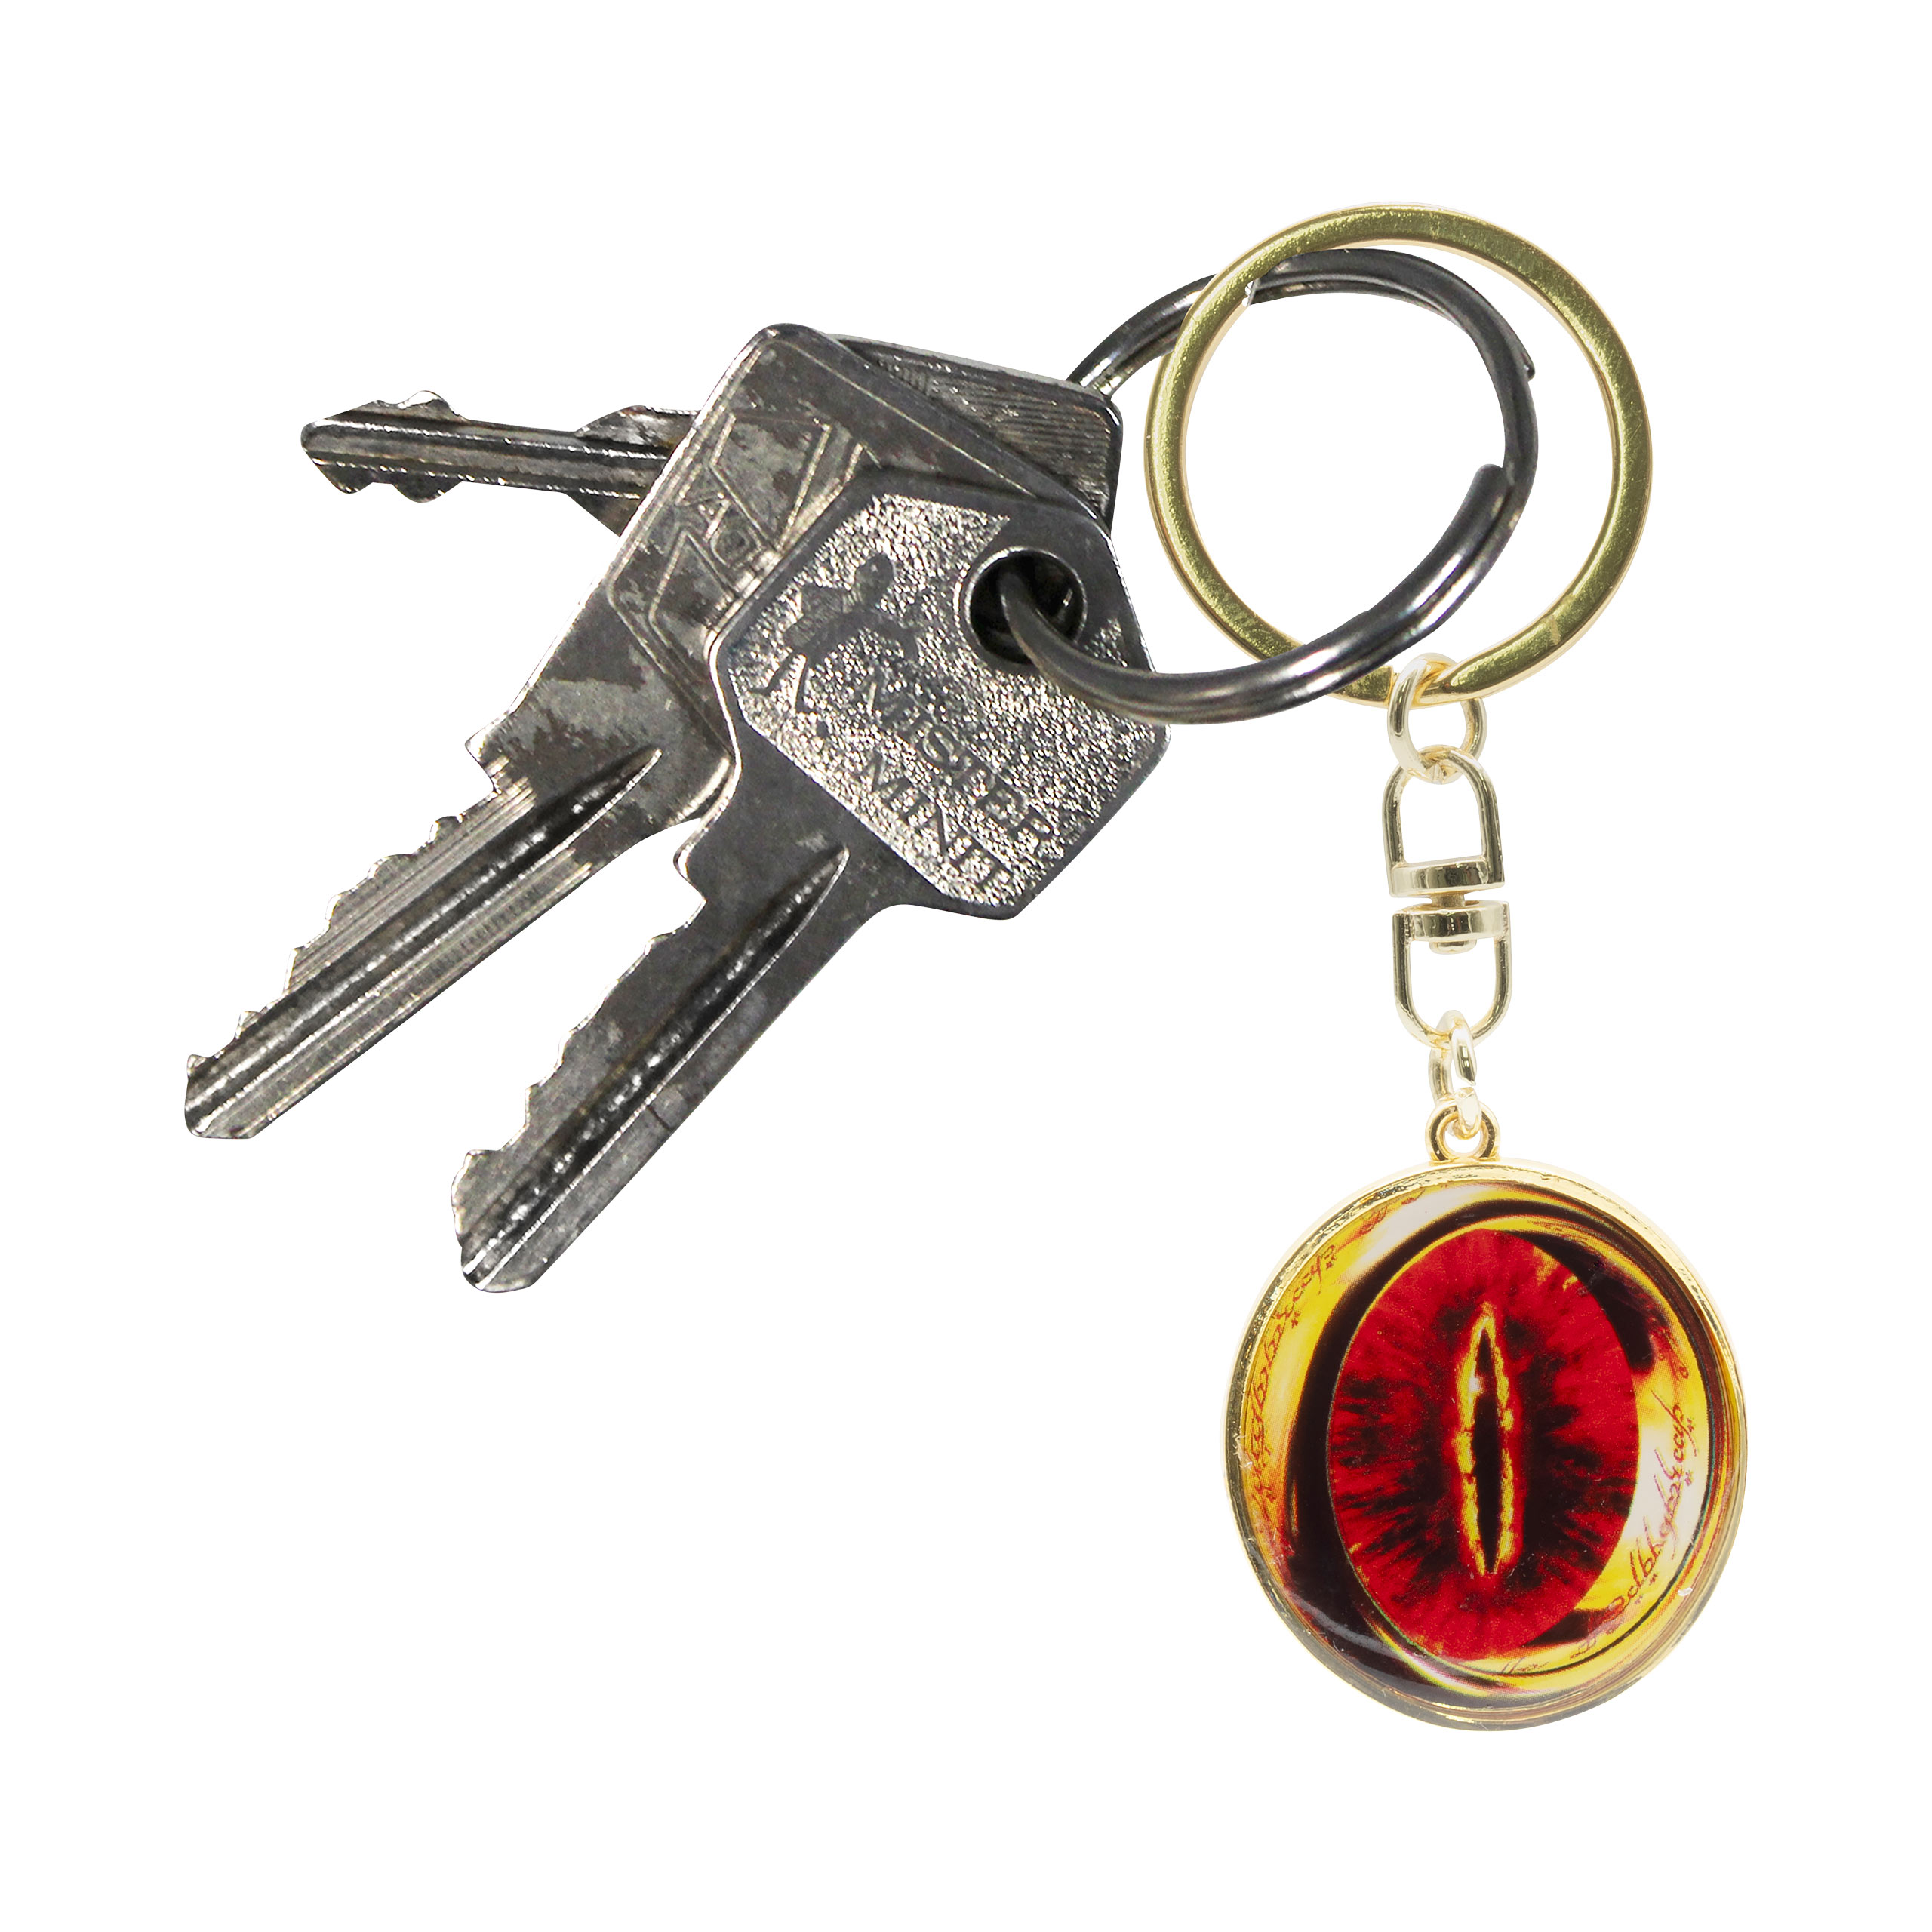 Lord of the Rings - Sauron Keychain